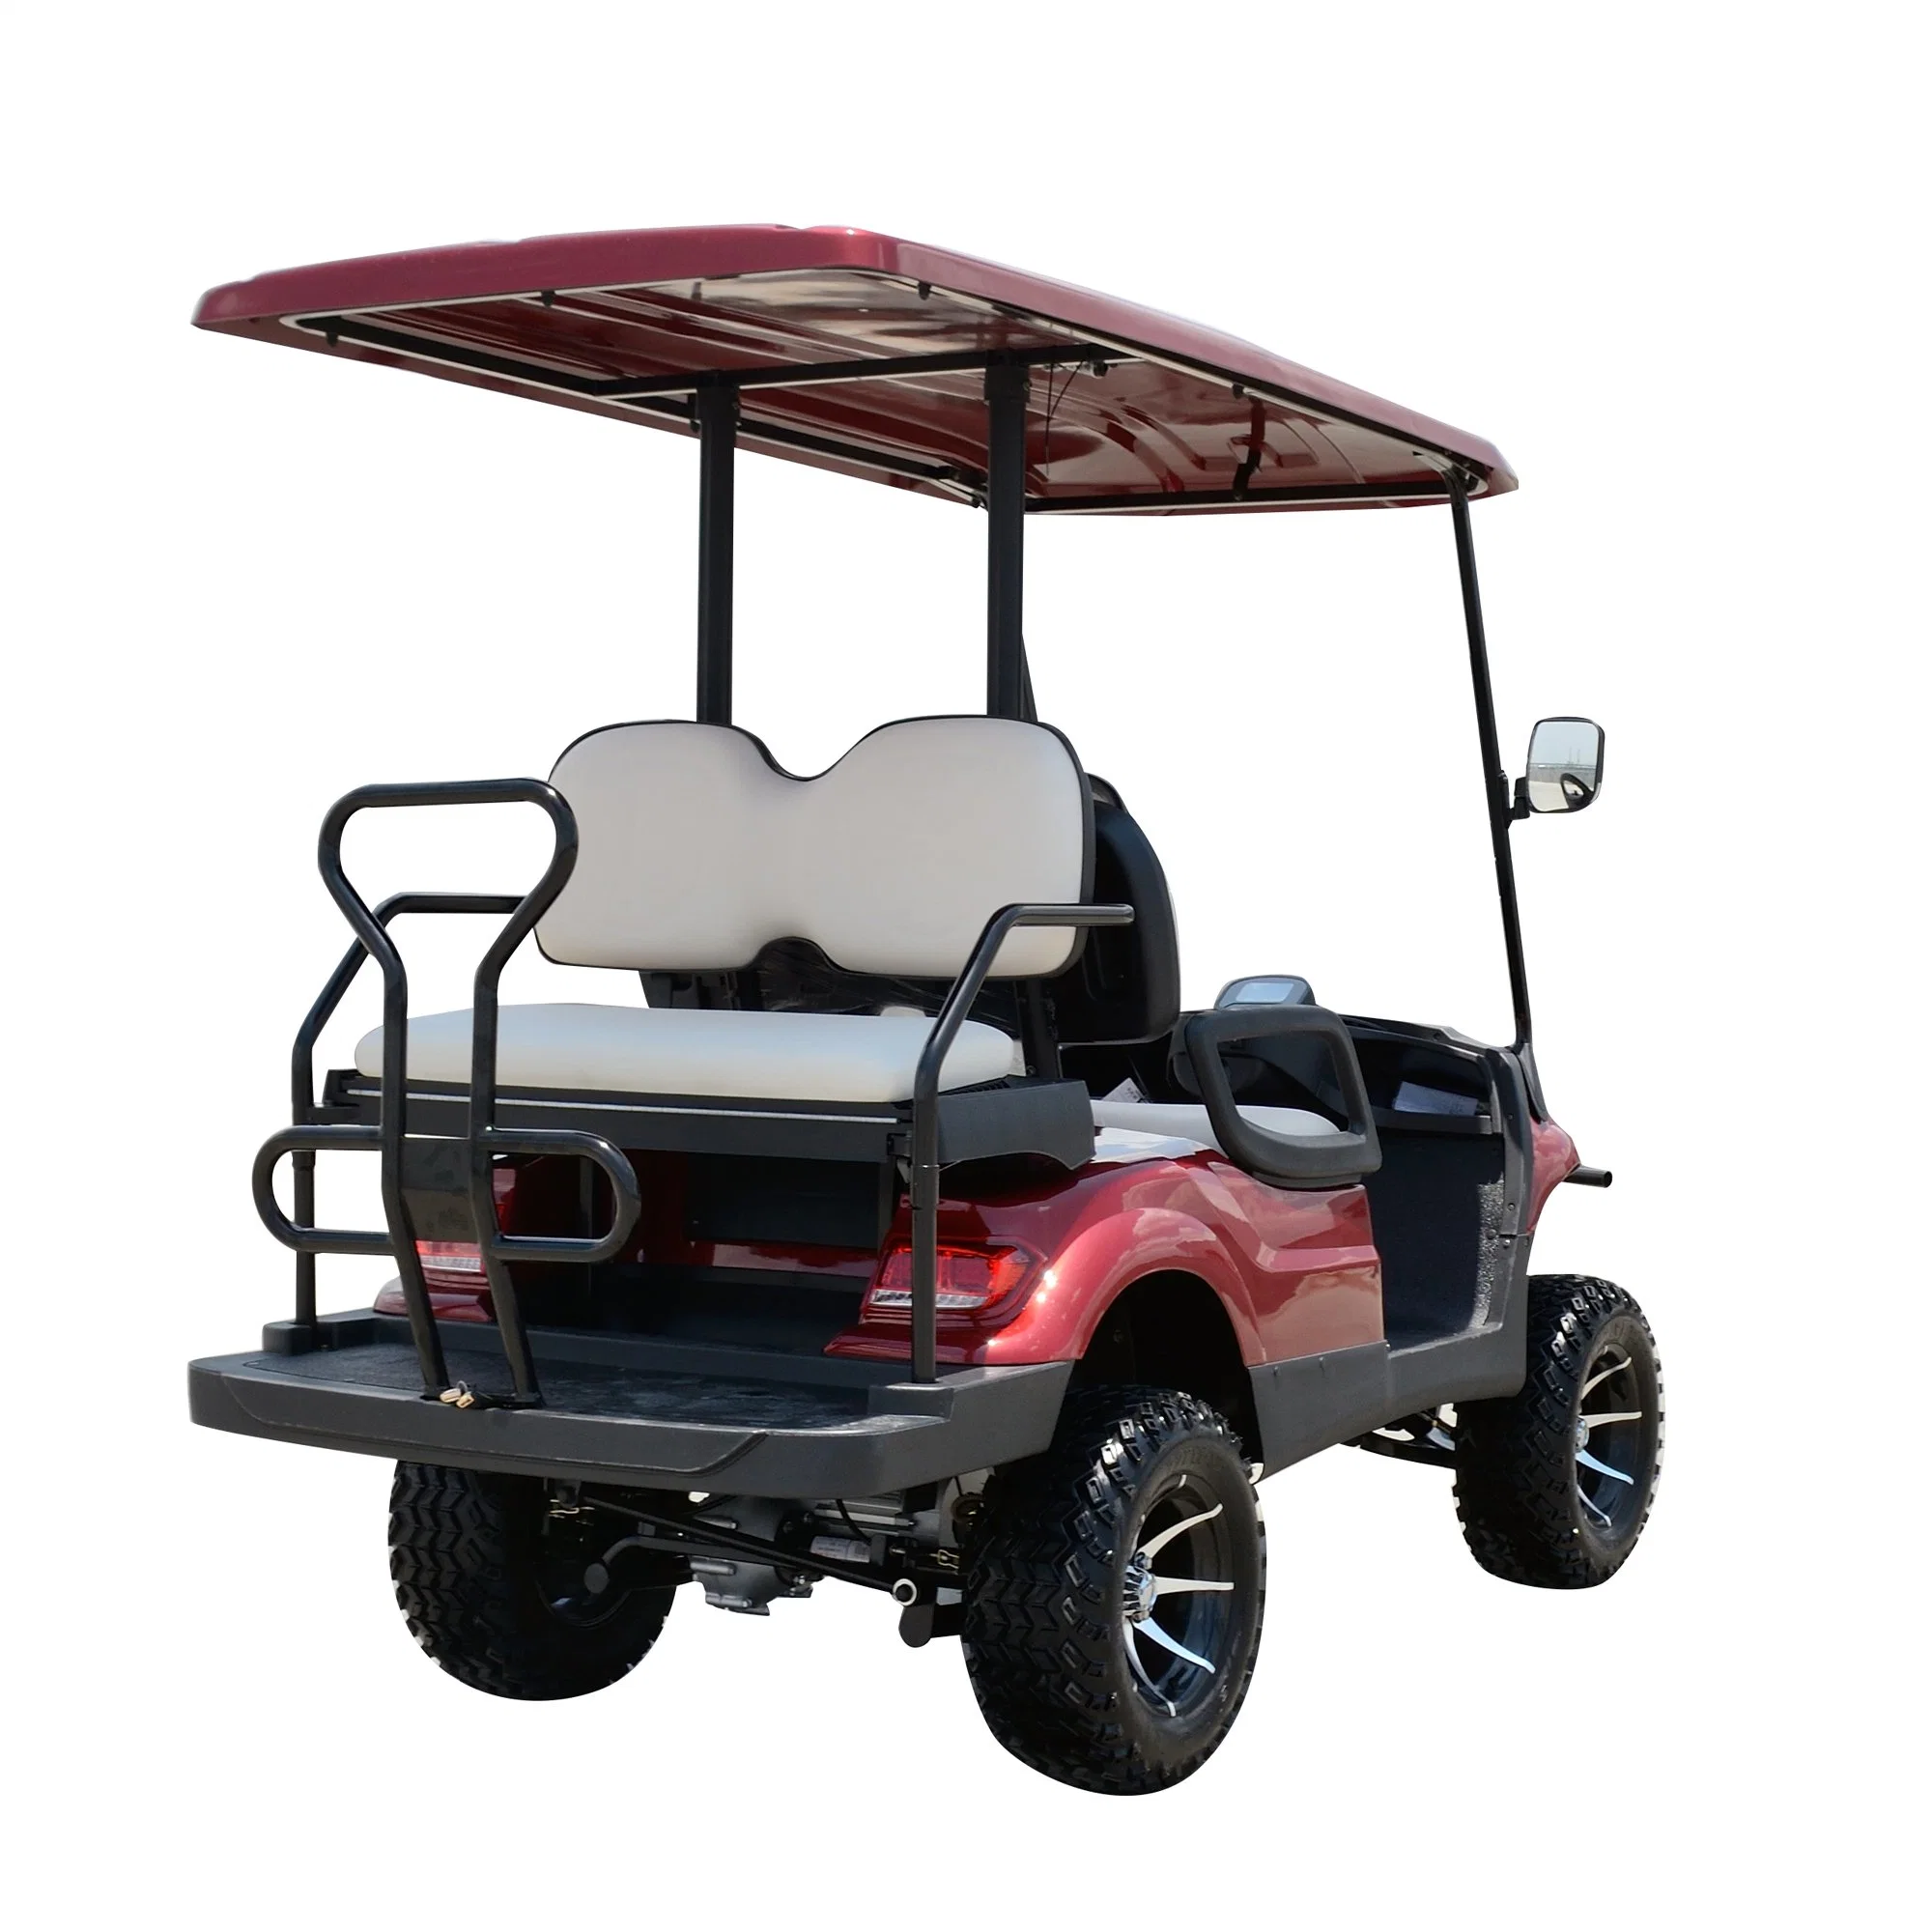 Sightseeing Tourist Classic Club Car with Great Price Battery 4 Seaters Golf Cart